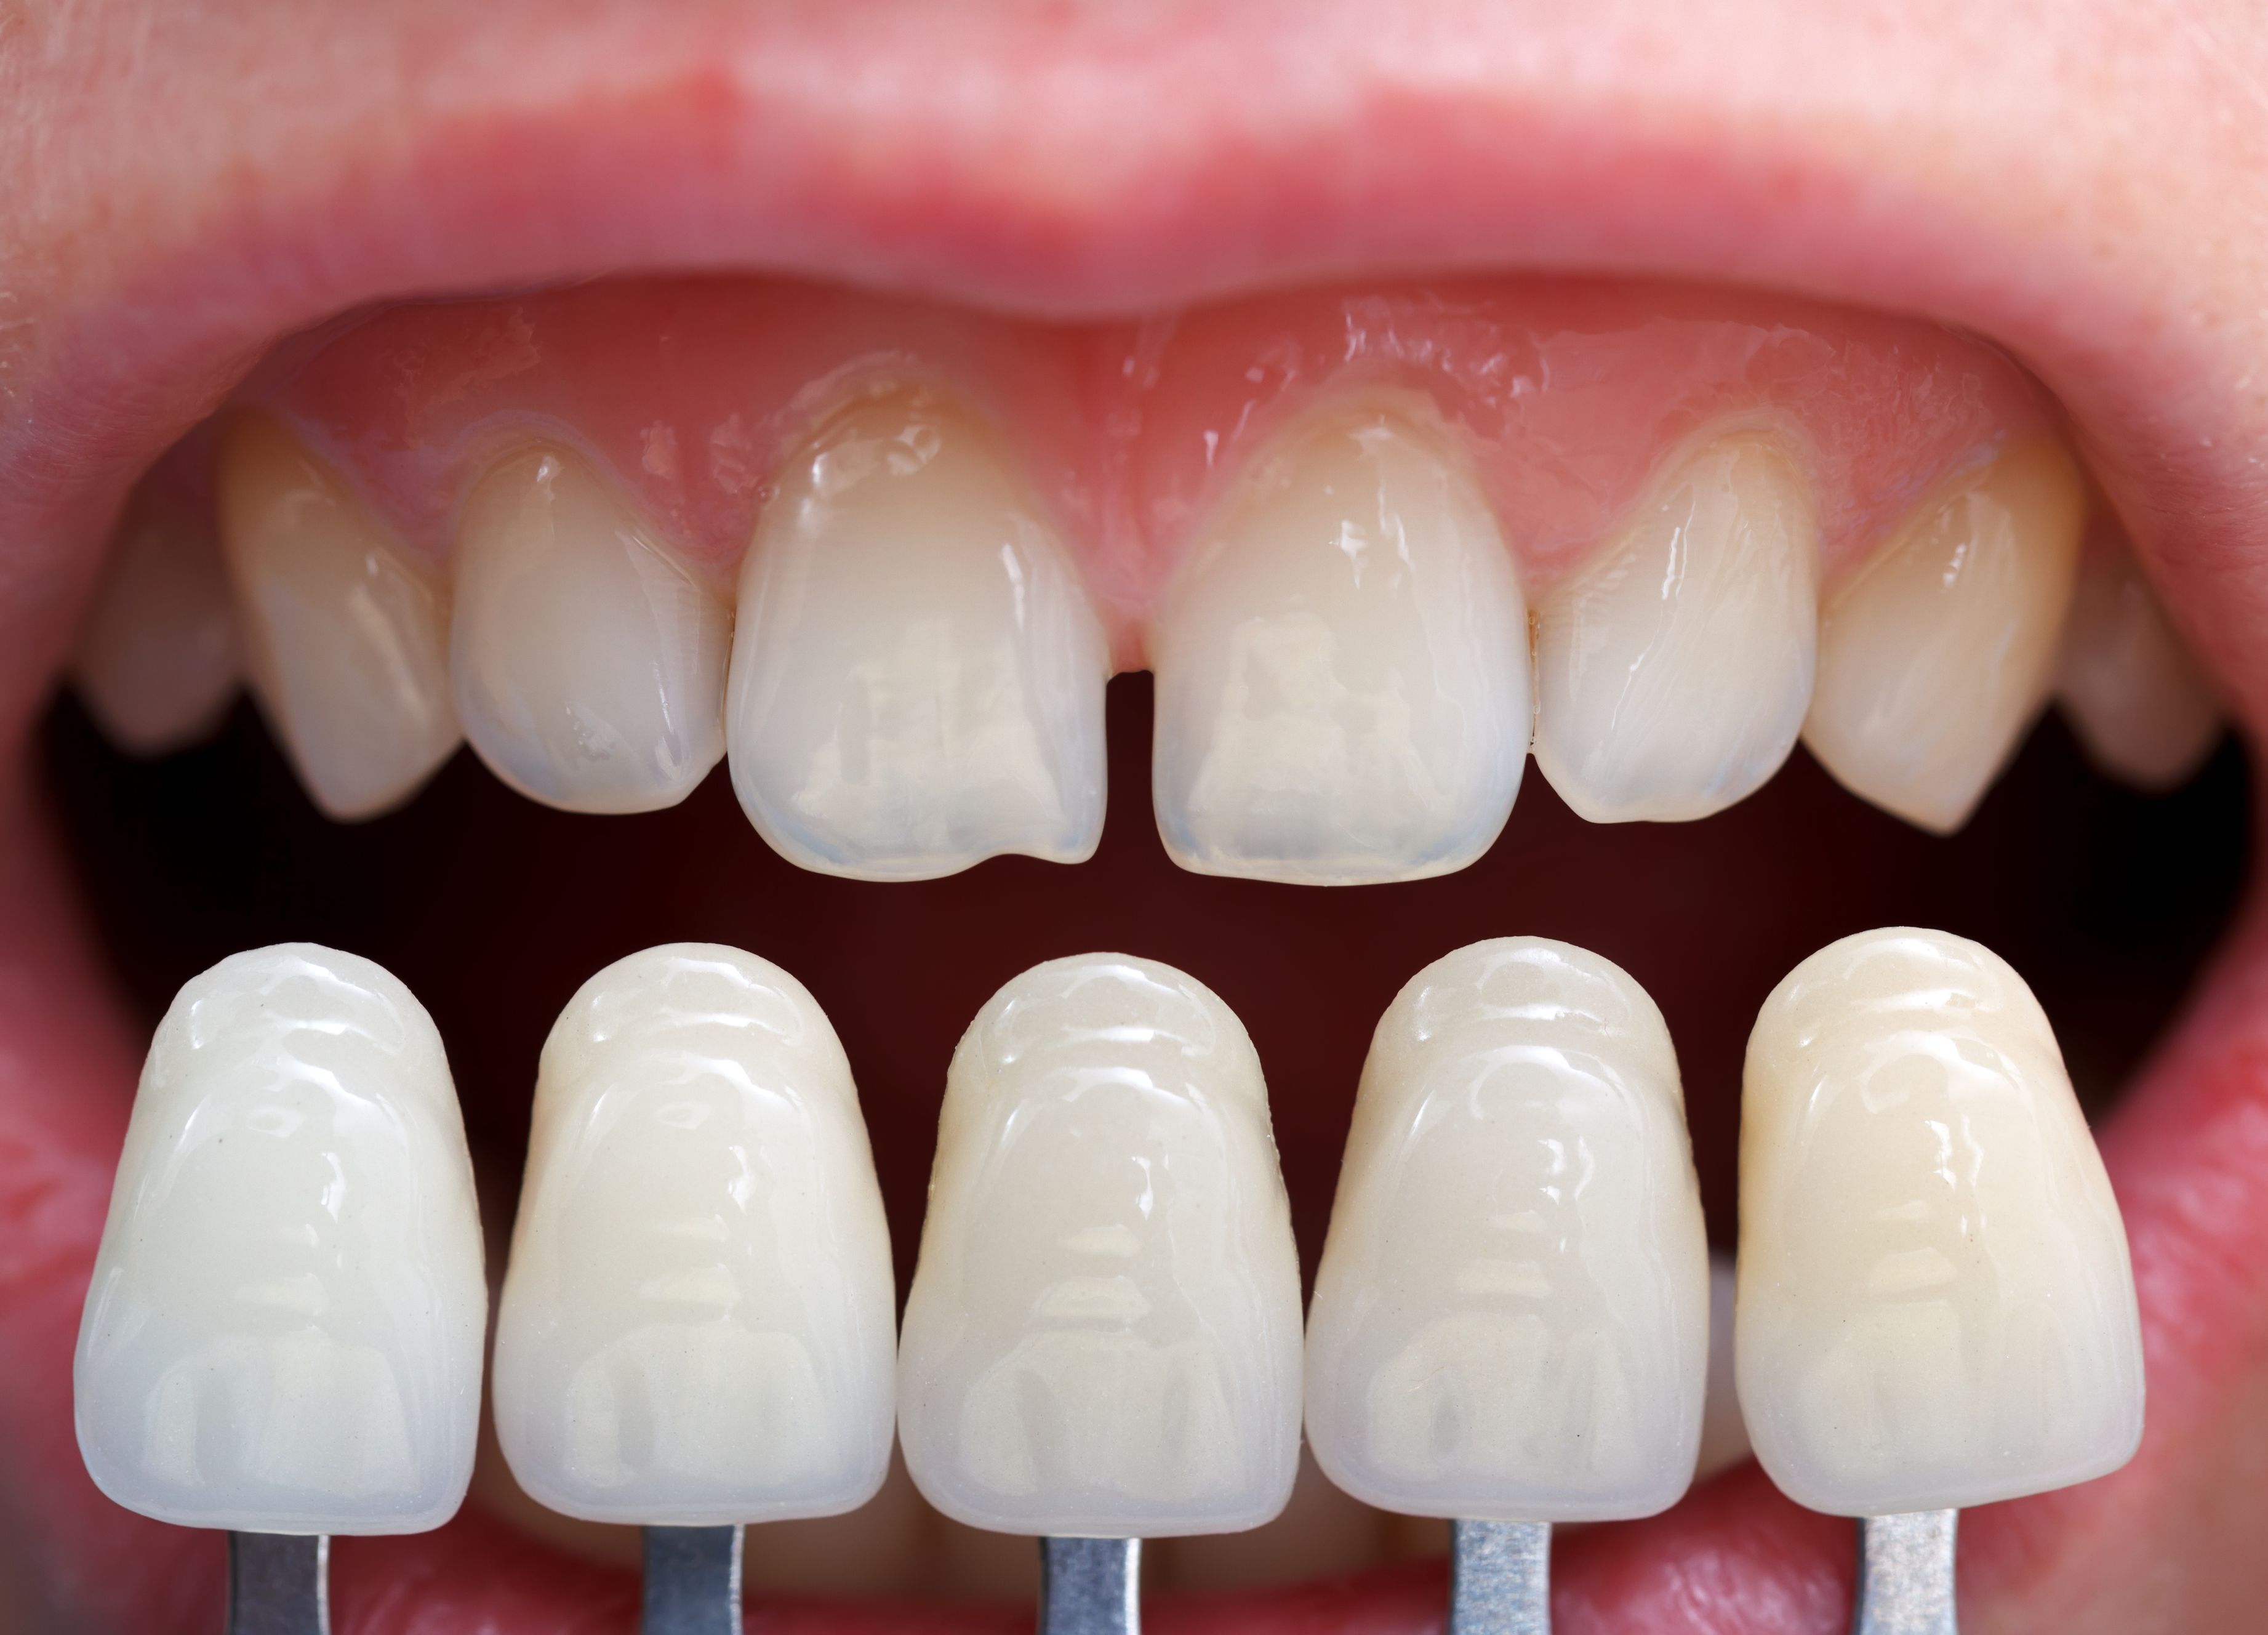 Where can I find a Cosmetic Dentist in Peoria?